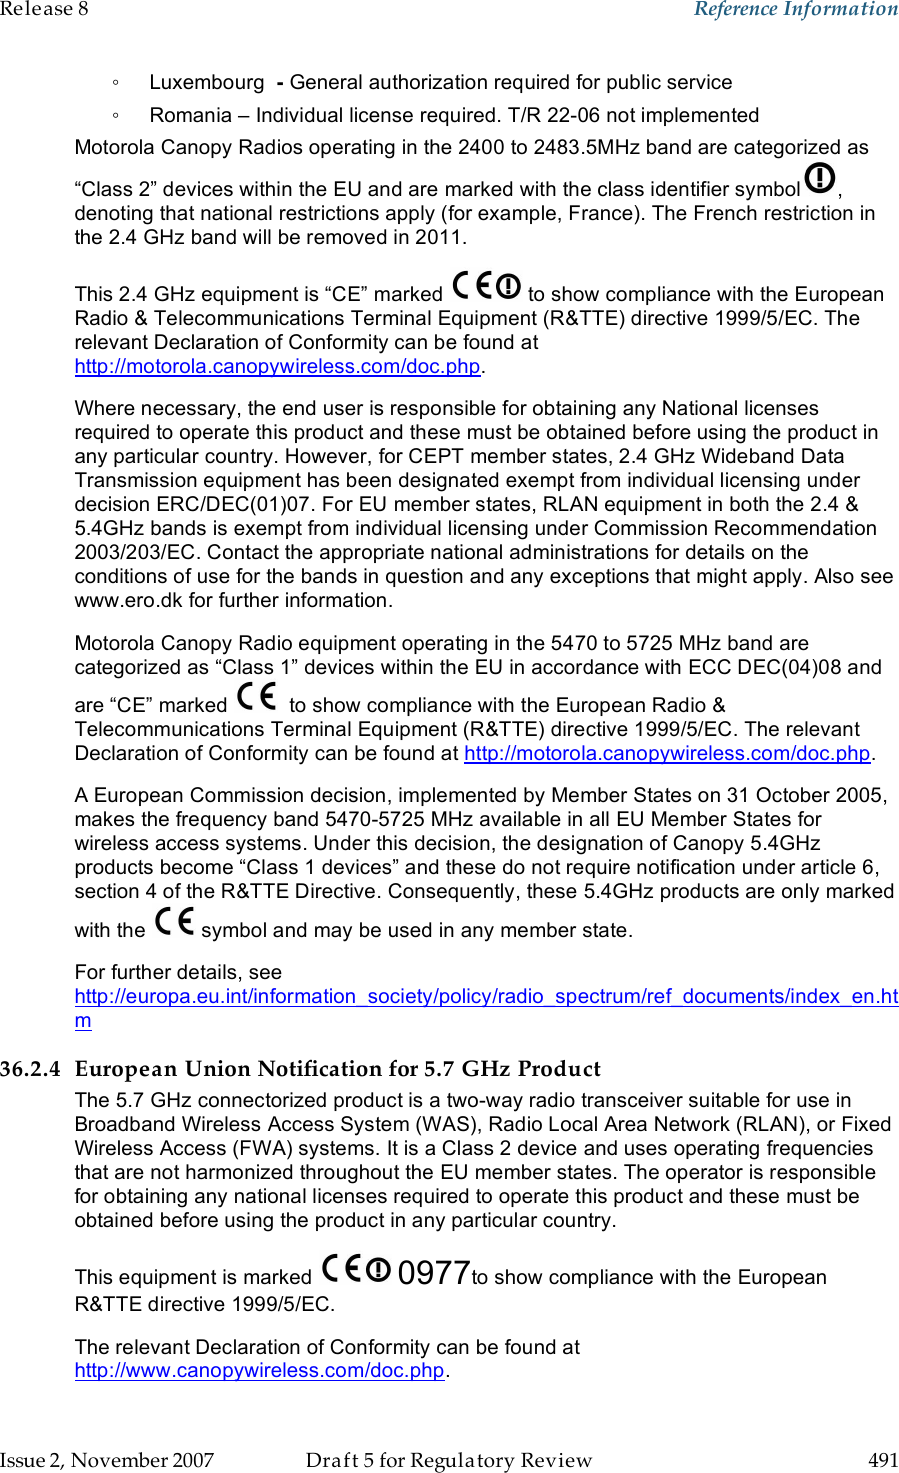 Release 8    Reference Information   Issue 2, November 2007  Draft 5 for Regulatory Review  491     ◦  Luxembourg  - General authorization required for public service ◦  Romania – Individual license required. T/R 22-06 not implemented Motorola Canopy Radios operating in the 2400 to 2483.5MHz band are categorized as “Class 2” devices within the EU and are marked with the class identifier symbol , denoting that national restrictions apply (for example, France). The French restriction in the 2.4 GHz band will be removed in 2011. This 2.4 GHz equipment is “CE” marked   to show compliance with the European Radio &amp; Telecommunications Terminal Equipment (R&amp;TTE) directive 1999/5/EC. The relevant Declaration of Conformity can be found at http://motorola.canopywireless.com/doc.php. Where necessary, the end user is responsible for obtaining any National licenses required to operate this product and these must be obtained before using the product in any particular country. However, for CEPT member states, 2.4 GHz Wideband Data Transmission equipment has been designated exempt from individual licensing under decision ERC/DEC(01)07. For EU member states, RLAN equipment in both the 2.4 &amp; 5.4GHz bands is exempt from individual licensing under Commission Recommendation 2003/203/EC. Contact the appropriate national administrations for details on the conditions of use for the bands in question and any exceptions that might apply. Also see www.ero.dk for further information.  Motorola Canopy Radio equipment operating in the 5470 to 5725 MHz band are categorized as “Class 1” devices within the EU in accordance with ECC DEC(04)08 and are “CE” marked    to show compliance with the European Radio &amp; Telecommunications Terminal Equipment (R&amp;TTE) directive 1999/5/EC. The relevant Declaration of Conformity can be found at http://motorola.canopywireless.com/doc.php. A European Commission decision, implemented by Member States on 31 October 2005, makes the frequency band 5470-5725 MHz available in all EU Member States for wireless access systems. Under this decision, the designation of Canopy 5.4GHz products become “Class 1 devices” and these do not require notification under article 6, section 4 of the R&amp;TTE Directive. Consequently, these 5.4GHz products are only marked with the   symbol and may be used in any member state.  For further details, see http://europa.eu.int/information_society/policy/radio_spectrum/ref_documents/index_en.htm 36.2.4 European Union Notification for 5.7 GHz Product The 5.7 GHz connectorized product is a two-way radio transceiver suitable for use in Broadband Wireless Access System (WAS), Radio Local Area Network (RLAN), or Fixed Wireless Access (FWA) systems. It is a Class 2 device and uses operating frequencies that are not harmonized throughout the EU member states. The operator is responsible for obtaining any national licenses required to operate this product and these must be obtained before using the product in any particular country. This equipment is marked   0977to show compliance with the European R&amp;TTE directive 1999/5/EC. The relevant Declaration of Conformity can be found at http://www.canopywireless.com/doc.php. 